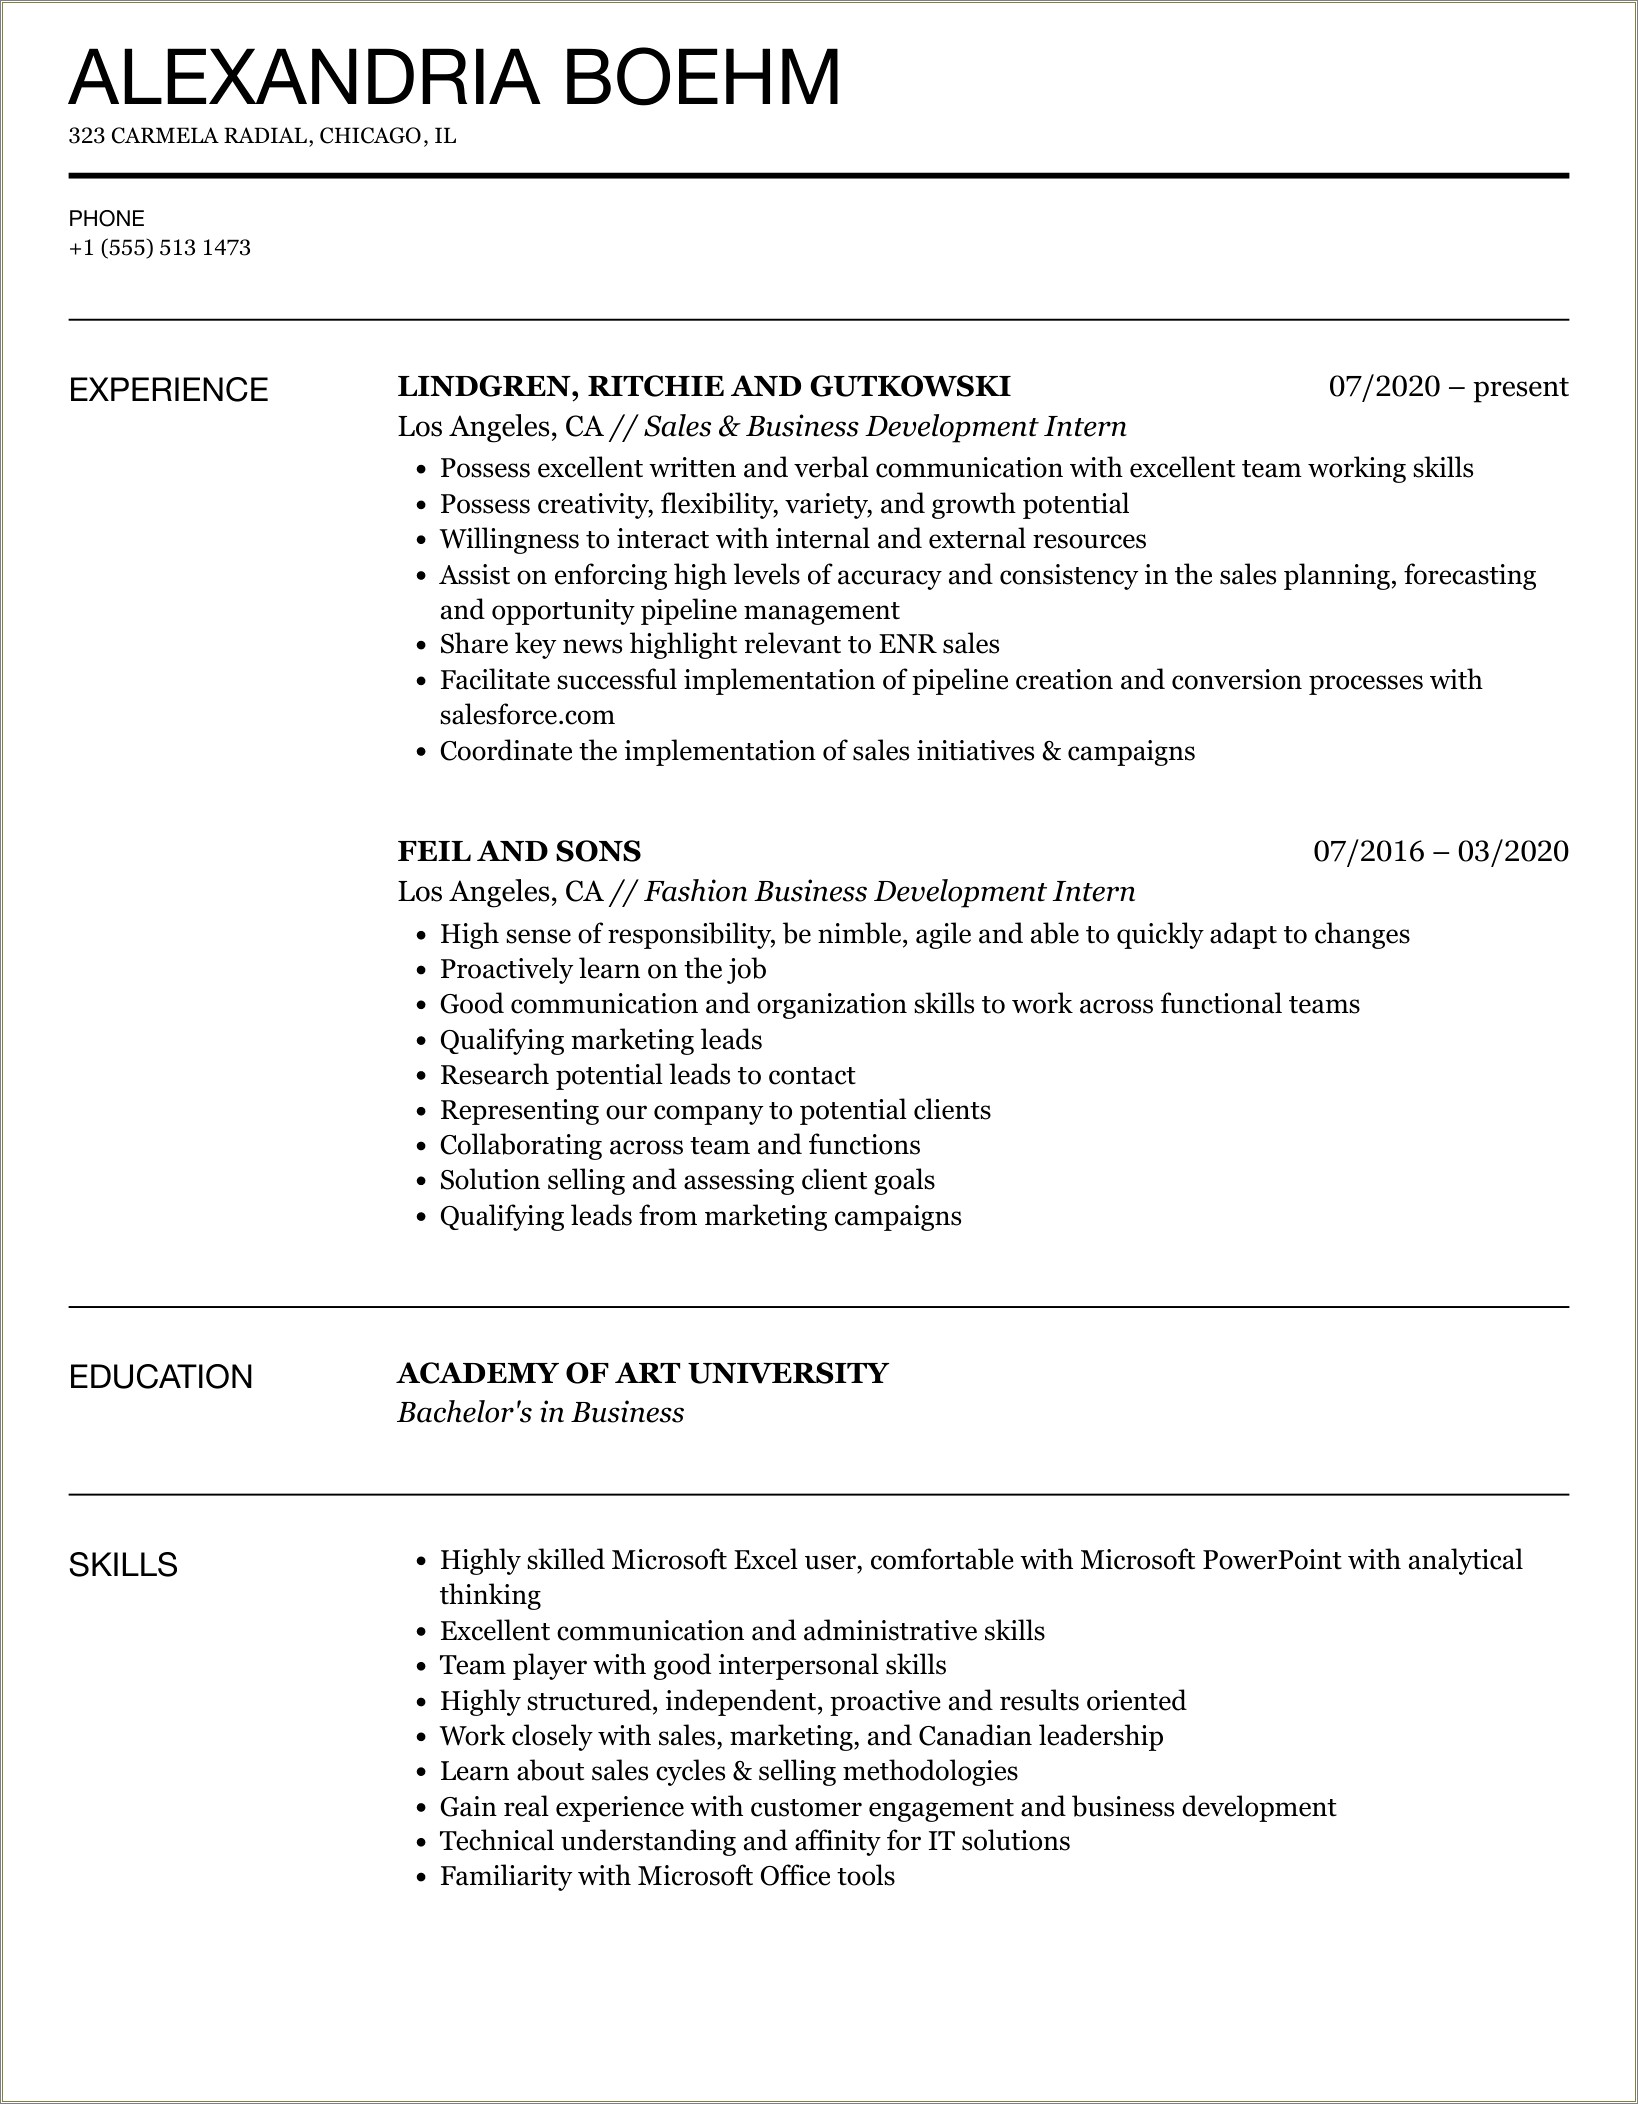 Resume Objective Internship Application For A Specific Company